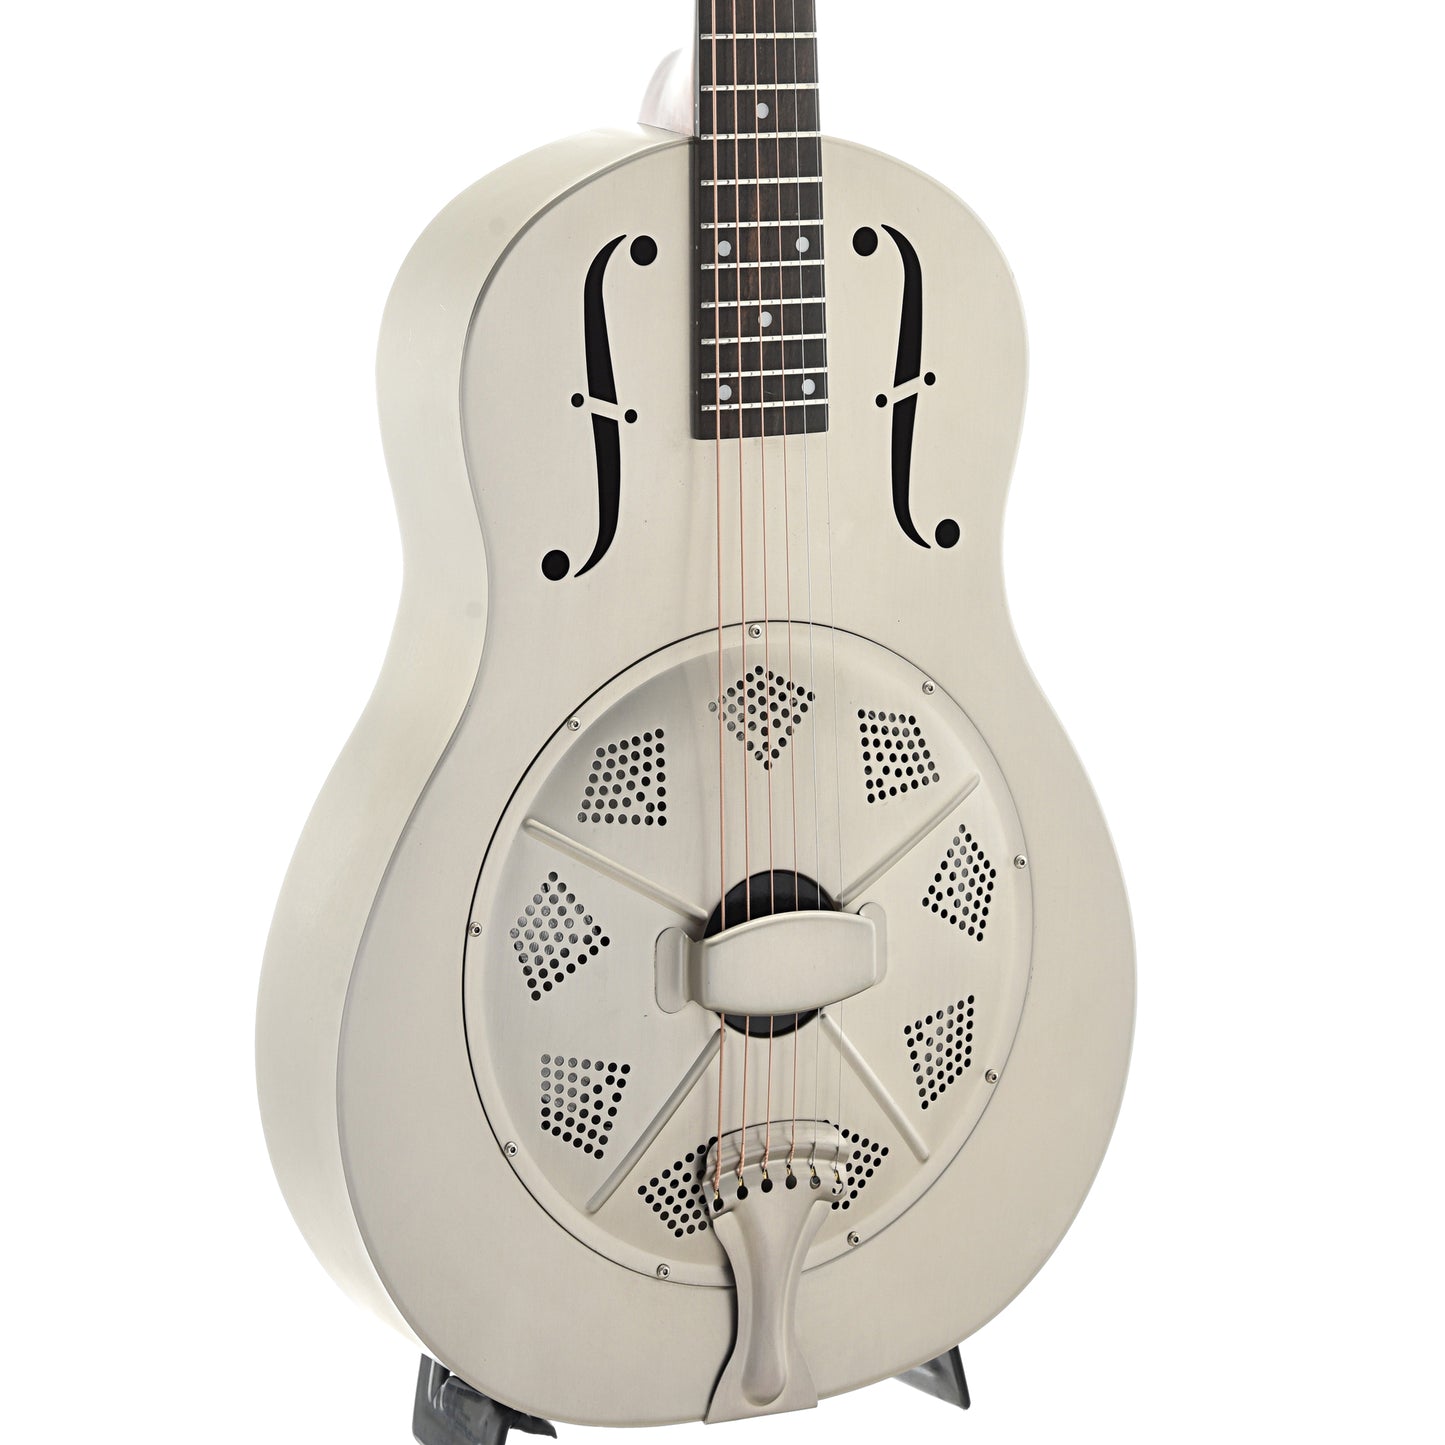 Front and Side of Regal RC-43 "Triolian" Resonator Guitar